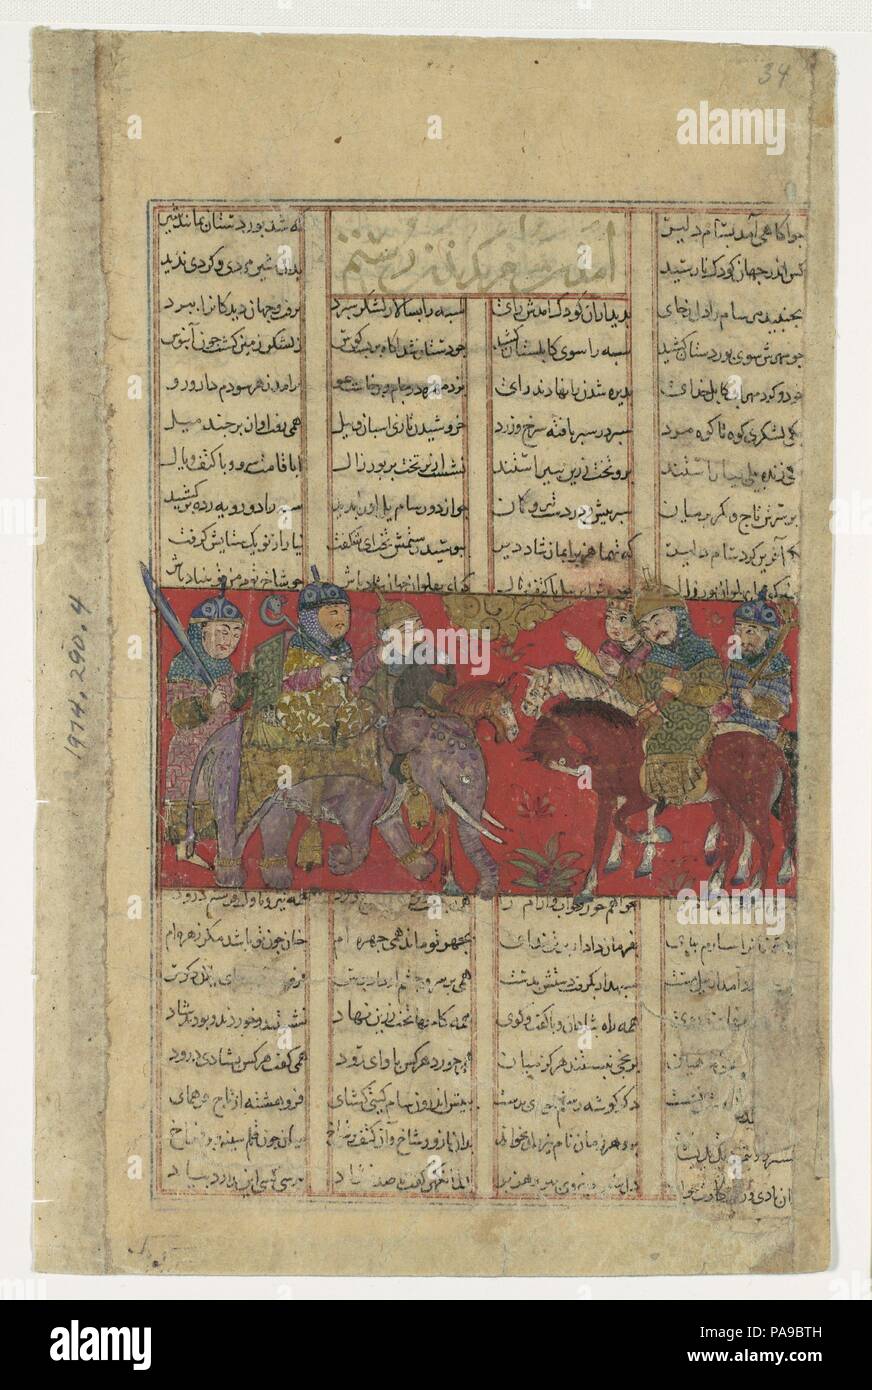 'Sam Comes to Inspect Rustam', Folio from a Shahnama (Book of Kings). Author: Abu'l Qasim Firdausi (935-1020). Dimensions: Page: 8 x 5 1/8 in. (20.3 x 13 cm)  Painting: 1 15/16 x 4 in. (5 x 10.1 cm). Date: ca. 1330-40.  Rustam, the future warrior hero of Iran, was such a huge baby that he could only be born by Caesarian section.  Here, the noble Sam has come to inspect his grandson, already, though a child, reputed to resemble a lion in courage and daring.  Rustam has been seated on an elephant for the occasion, dressed as the warrior he is to become.  The artist has mistakenly given him a bea Stock Photo